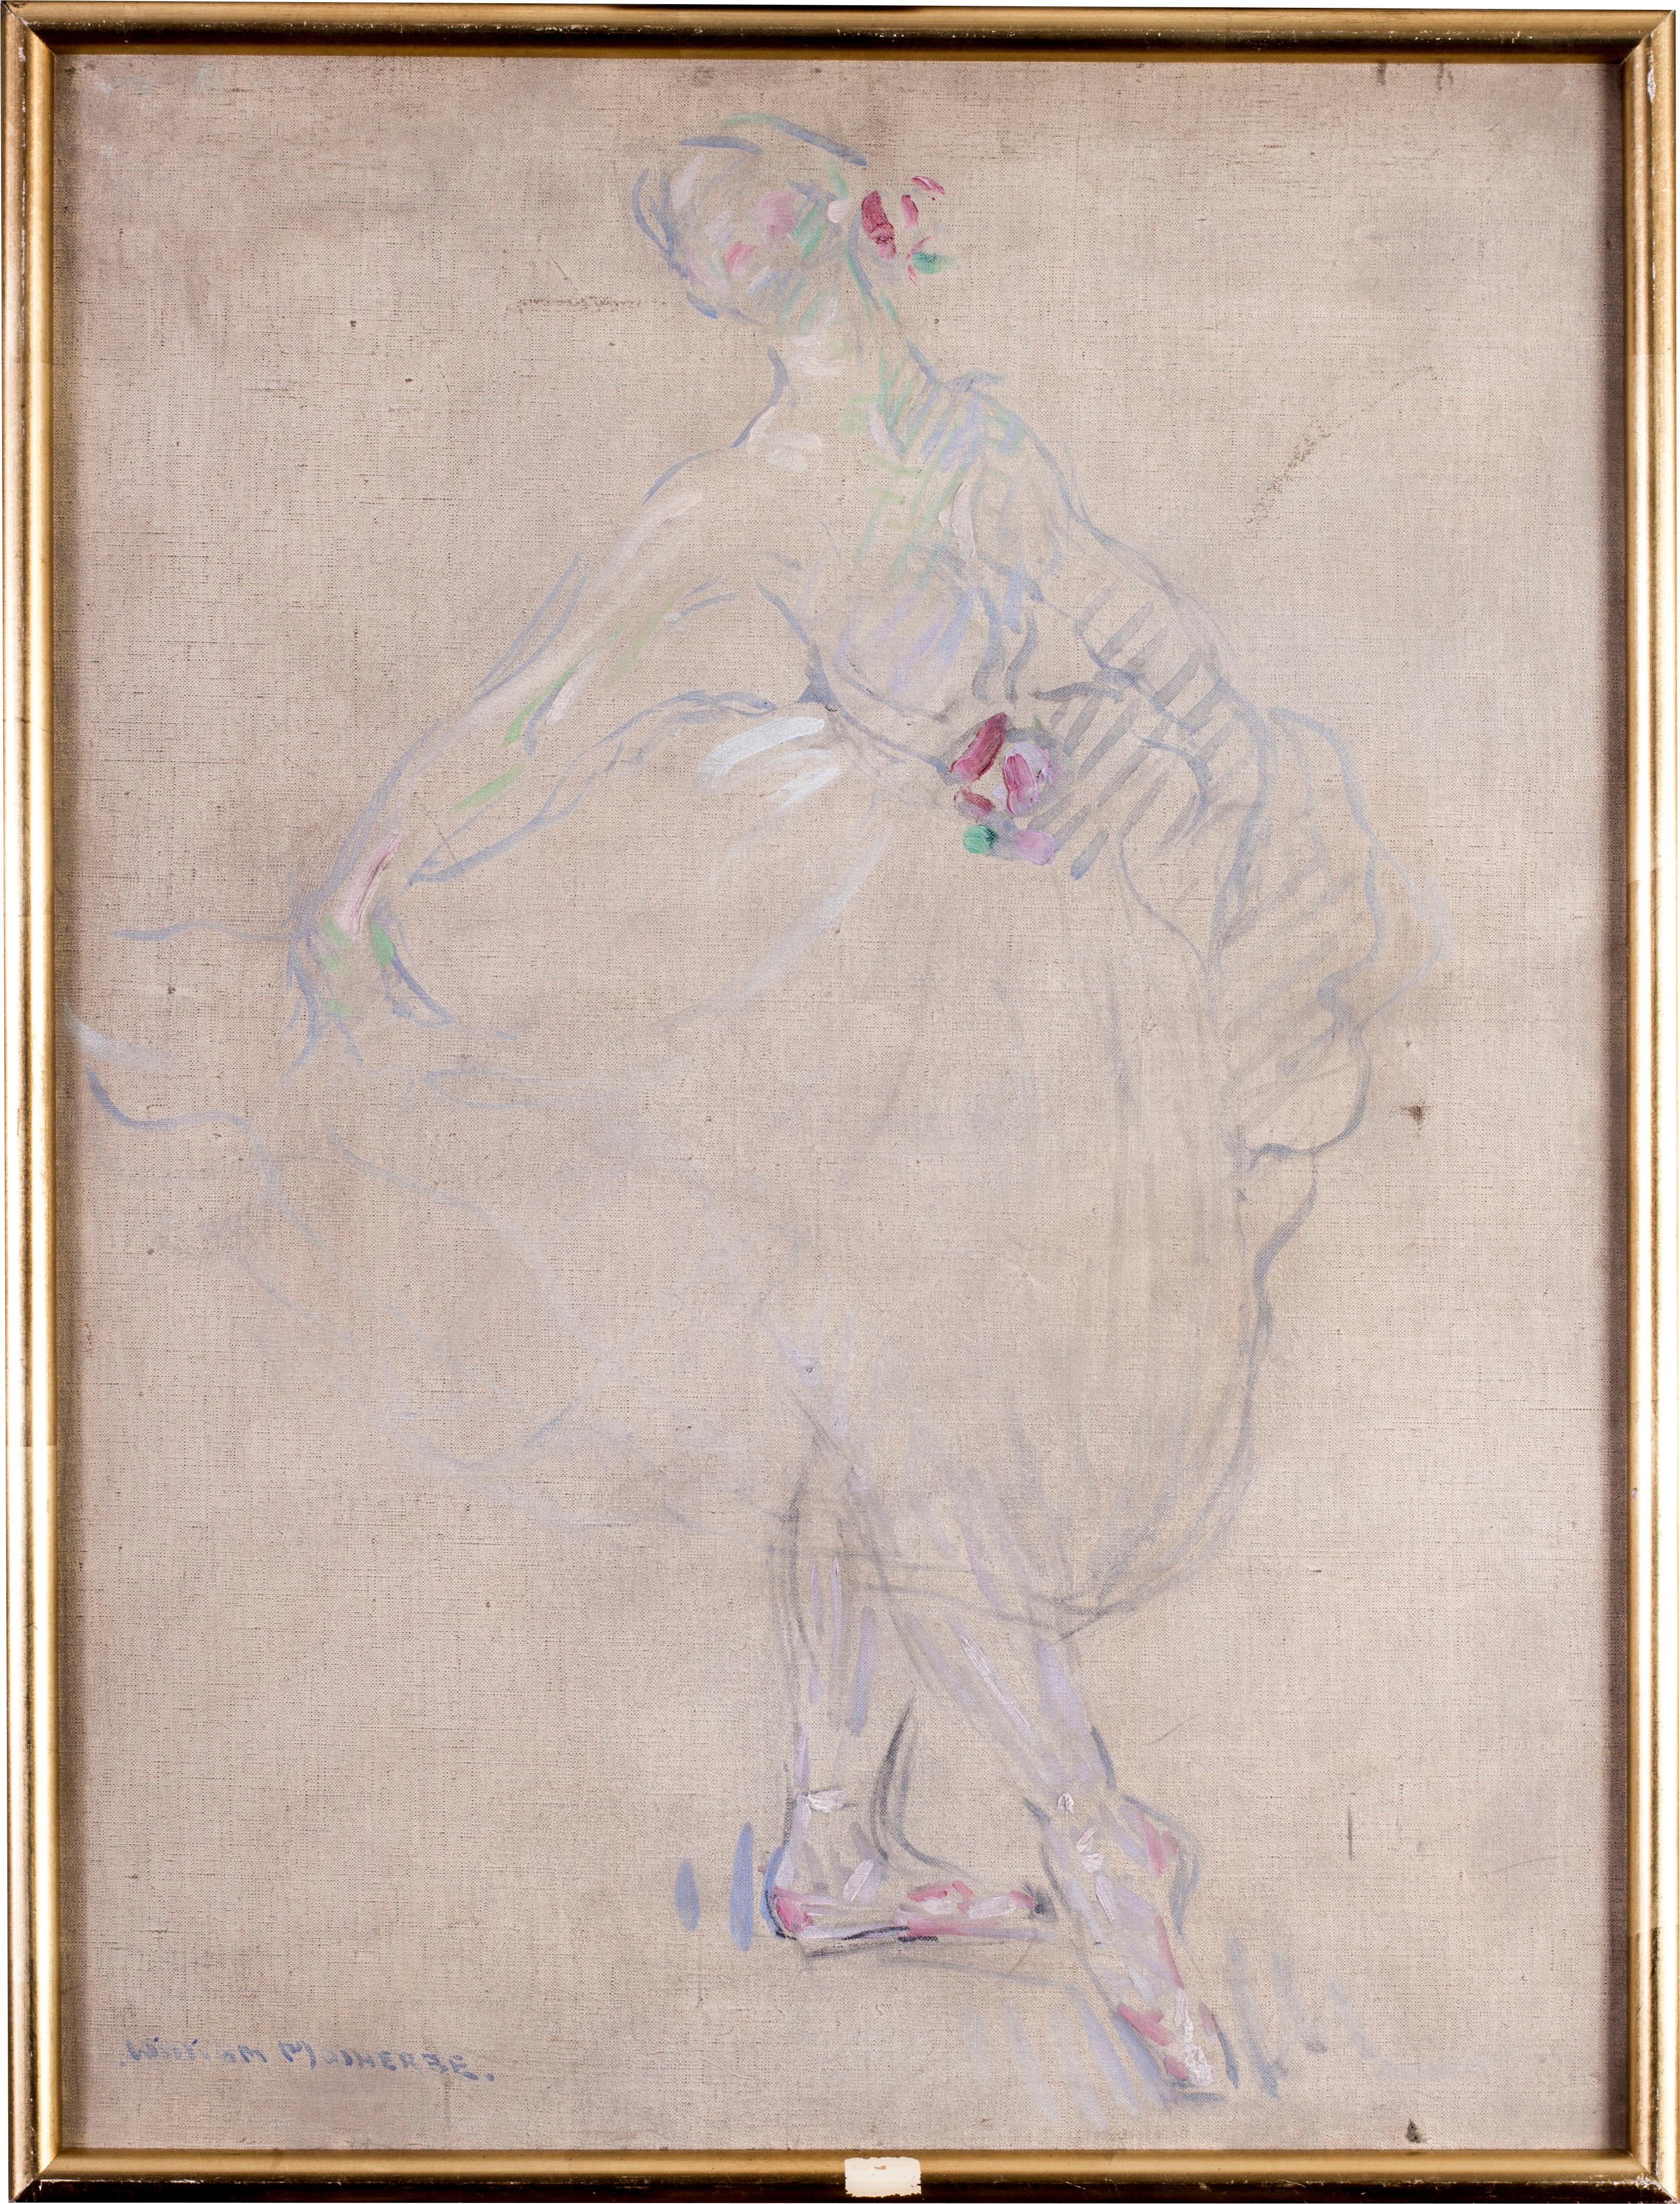 Danseuse, Paris 1911, a beautiful impressionist painting of a ballet dancer - Painting by William Malherbe